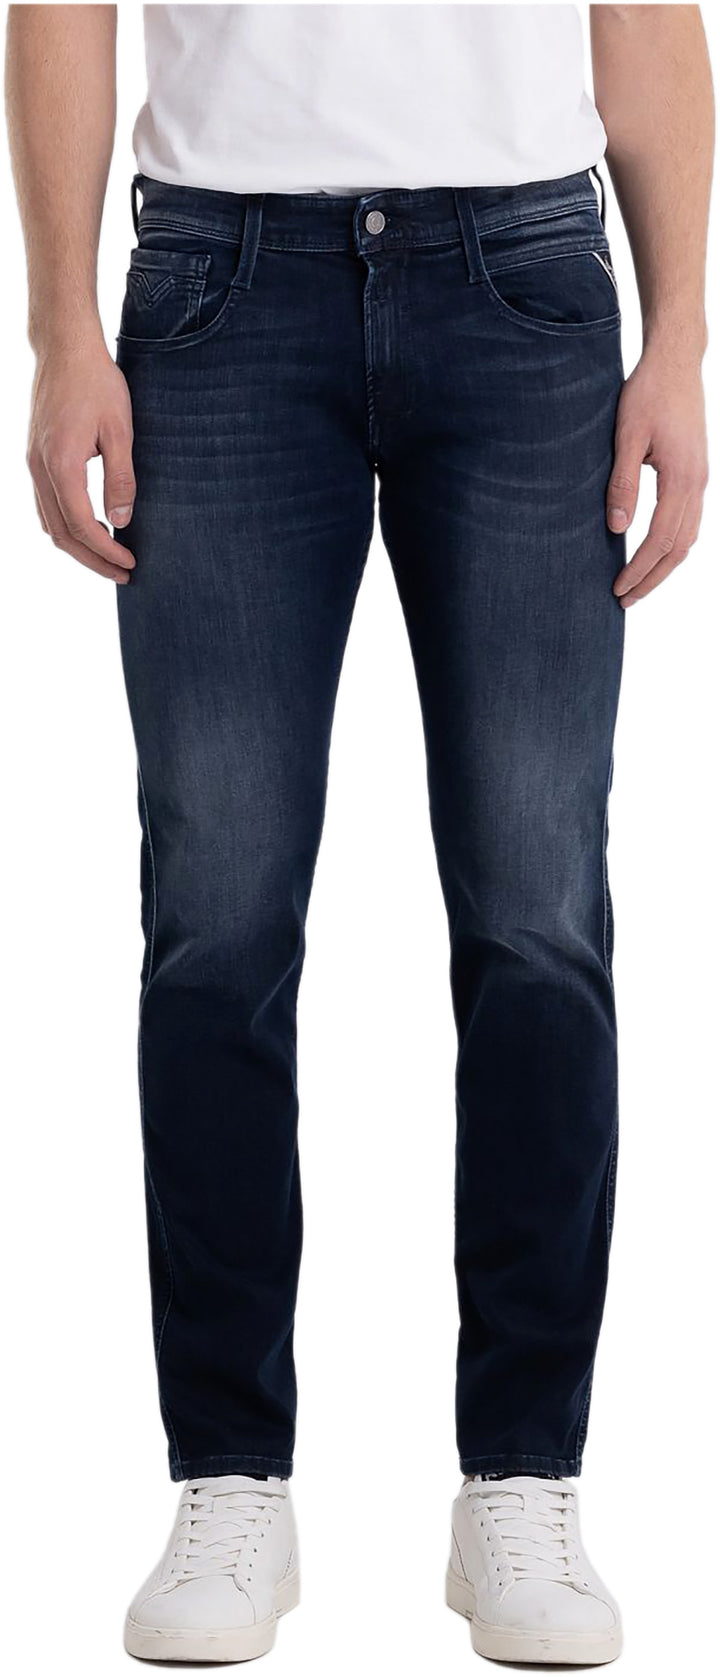 Replay Anbass Slim Fit Jeans For Men